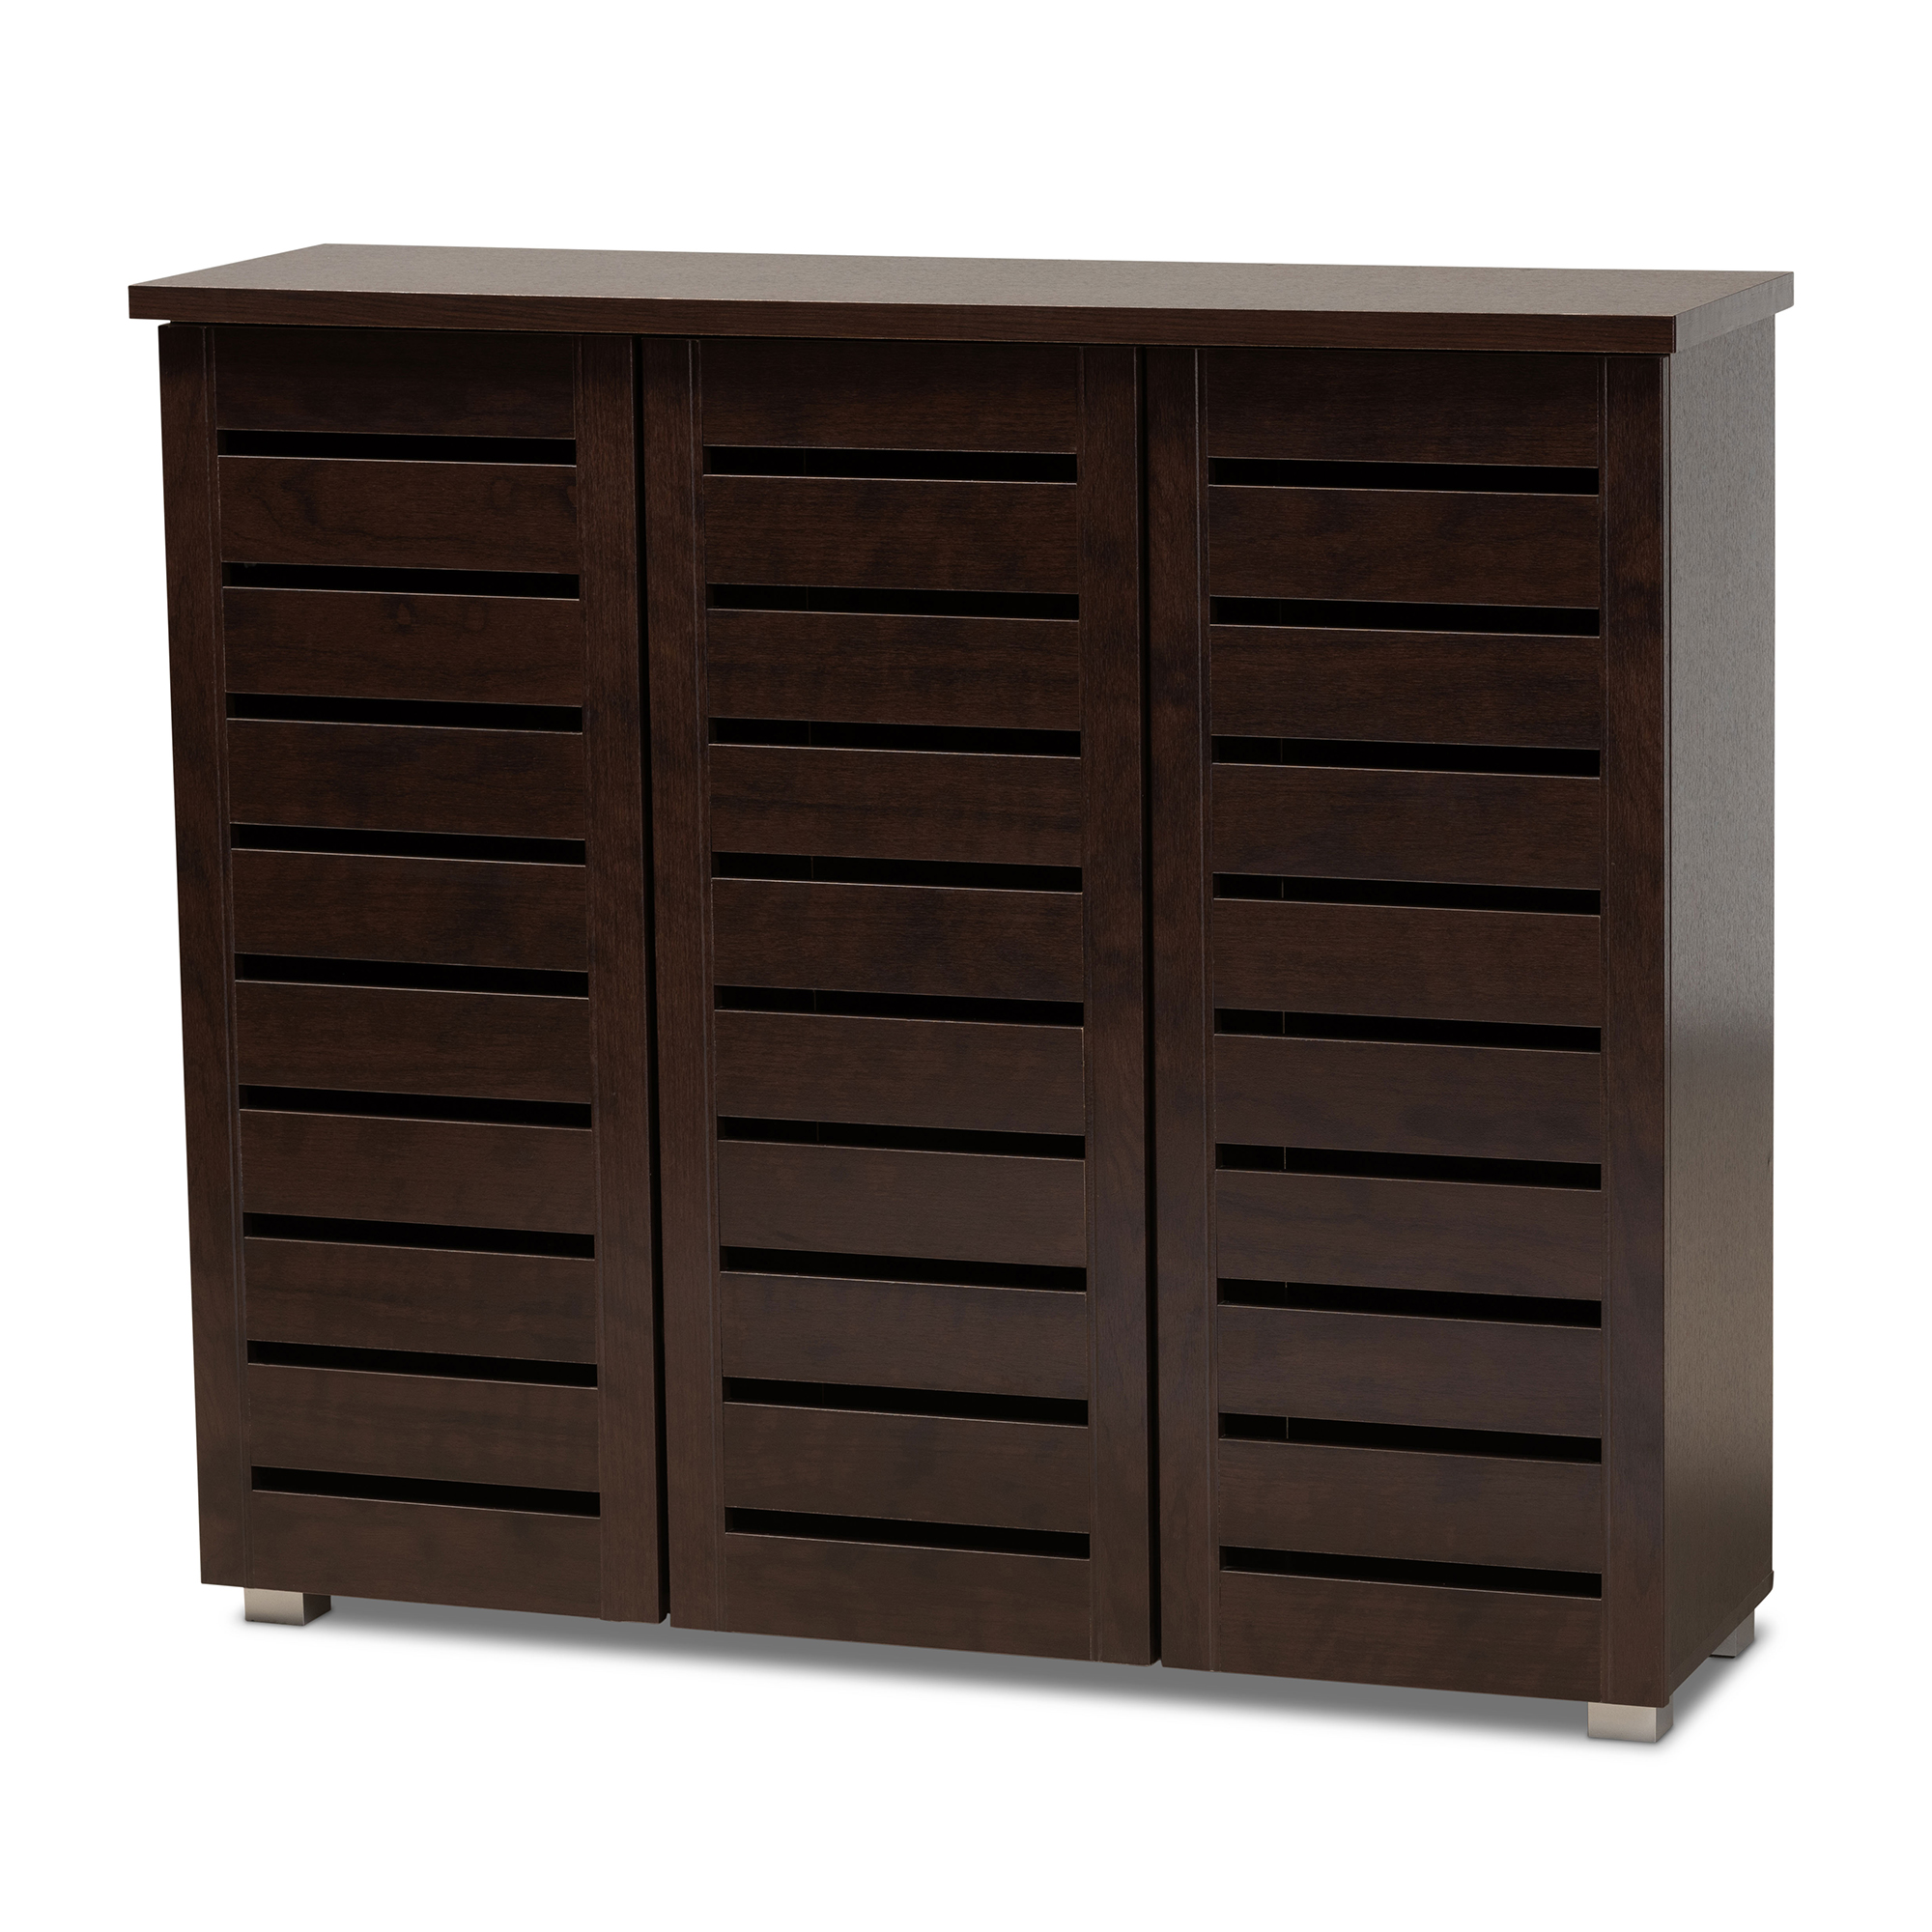 Baxton Studio Adalwin Modern and Contemporary 3-Door Dark Brown Wooden Entryway Shoes Storage Cabinet Affordable modern furniture in Chicago, Classic Shoe Storage Seating Bench, cheap shoe storage, cheap entry way bench